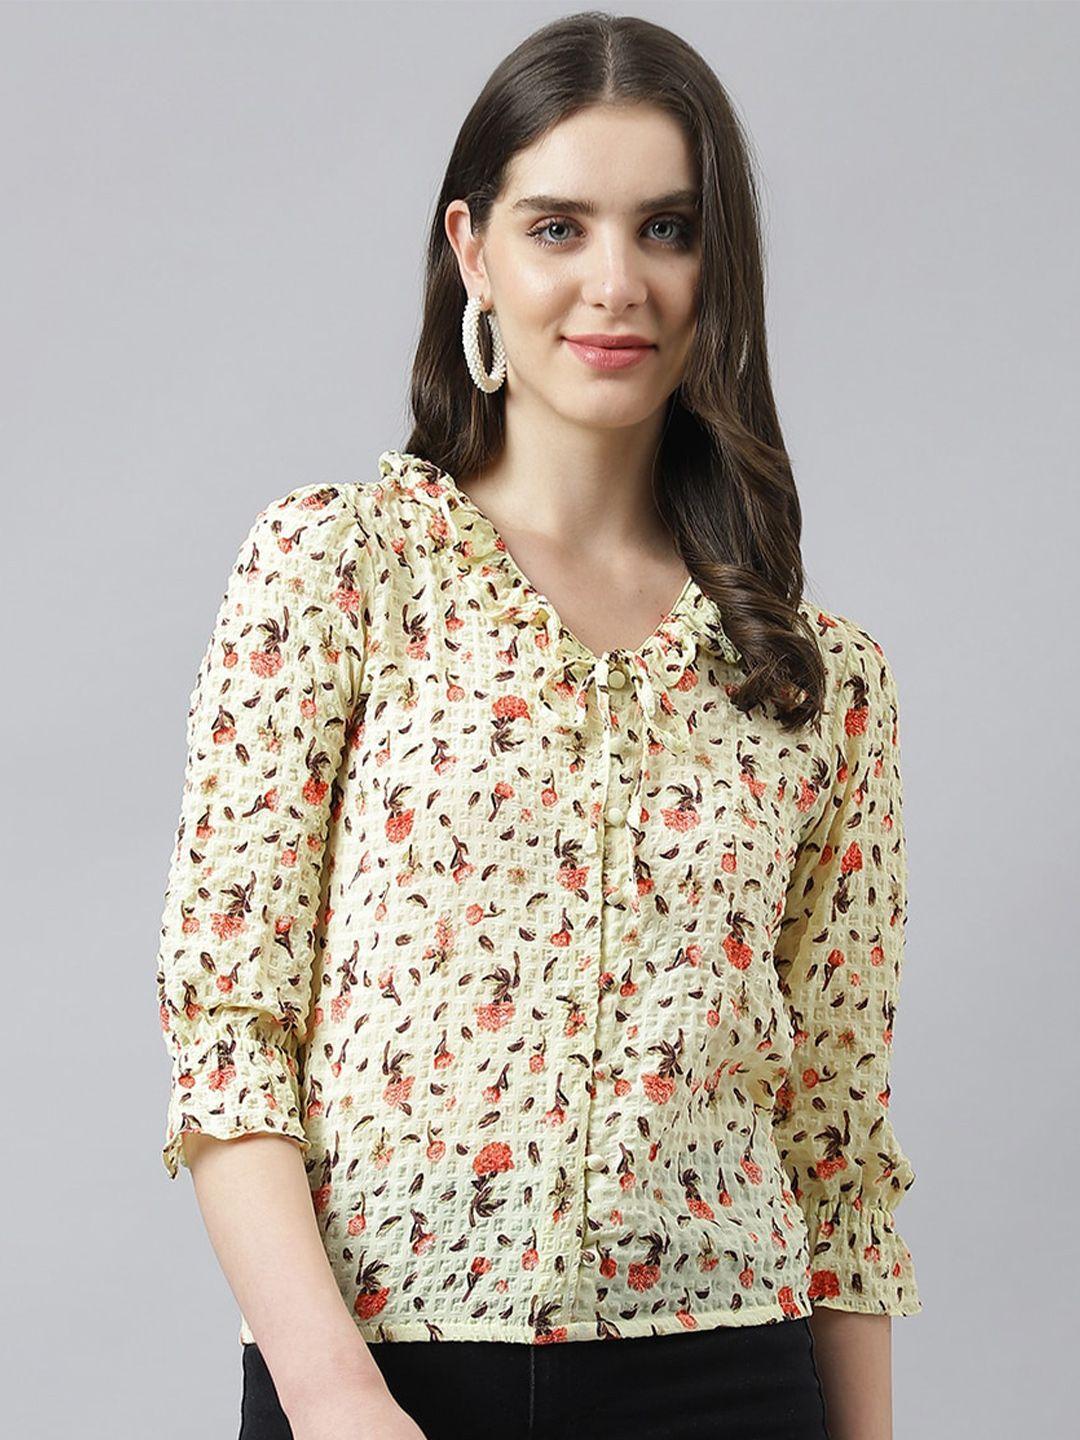 latin-quarters-floral-print-bell-sleeves-shirt-style-top